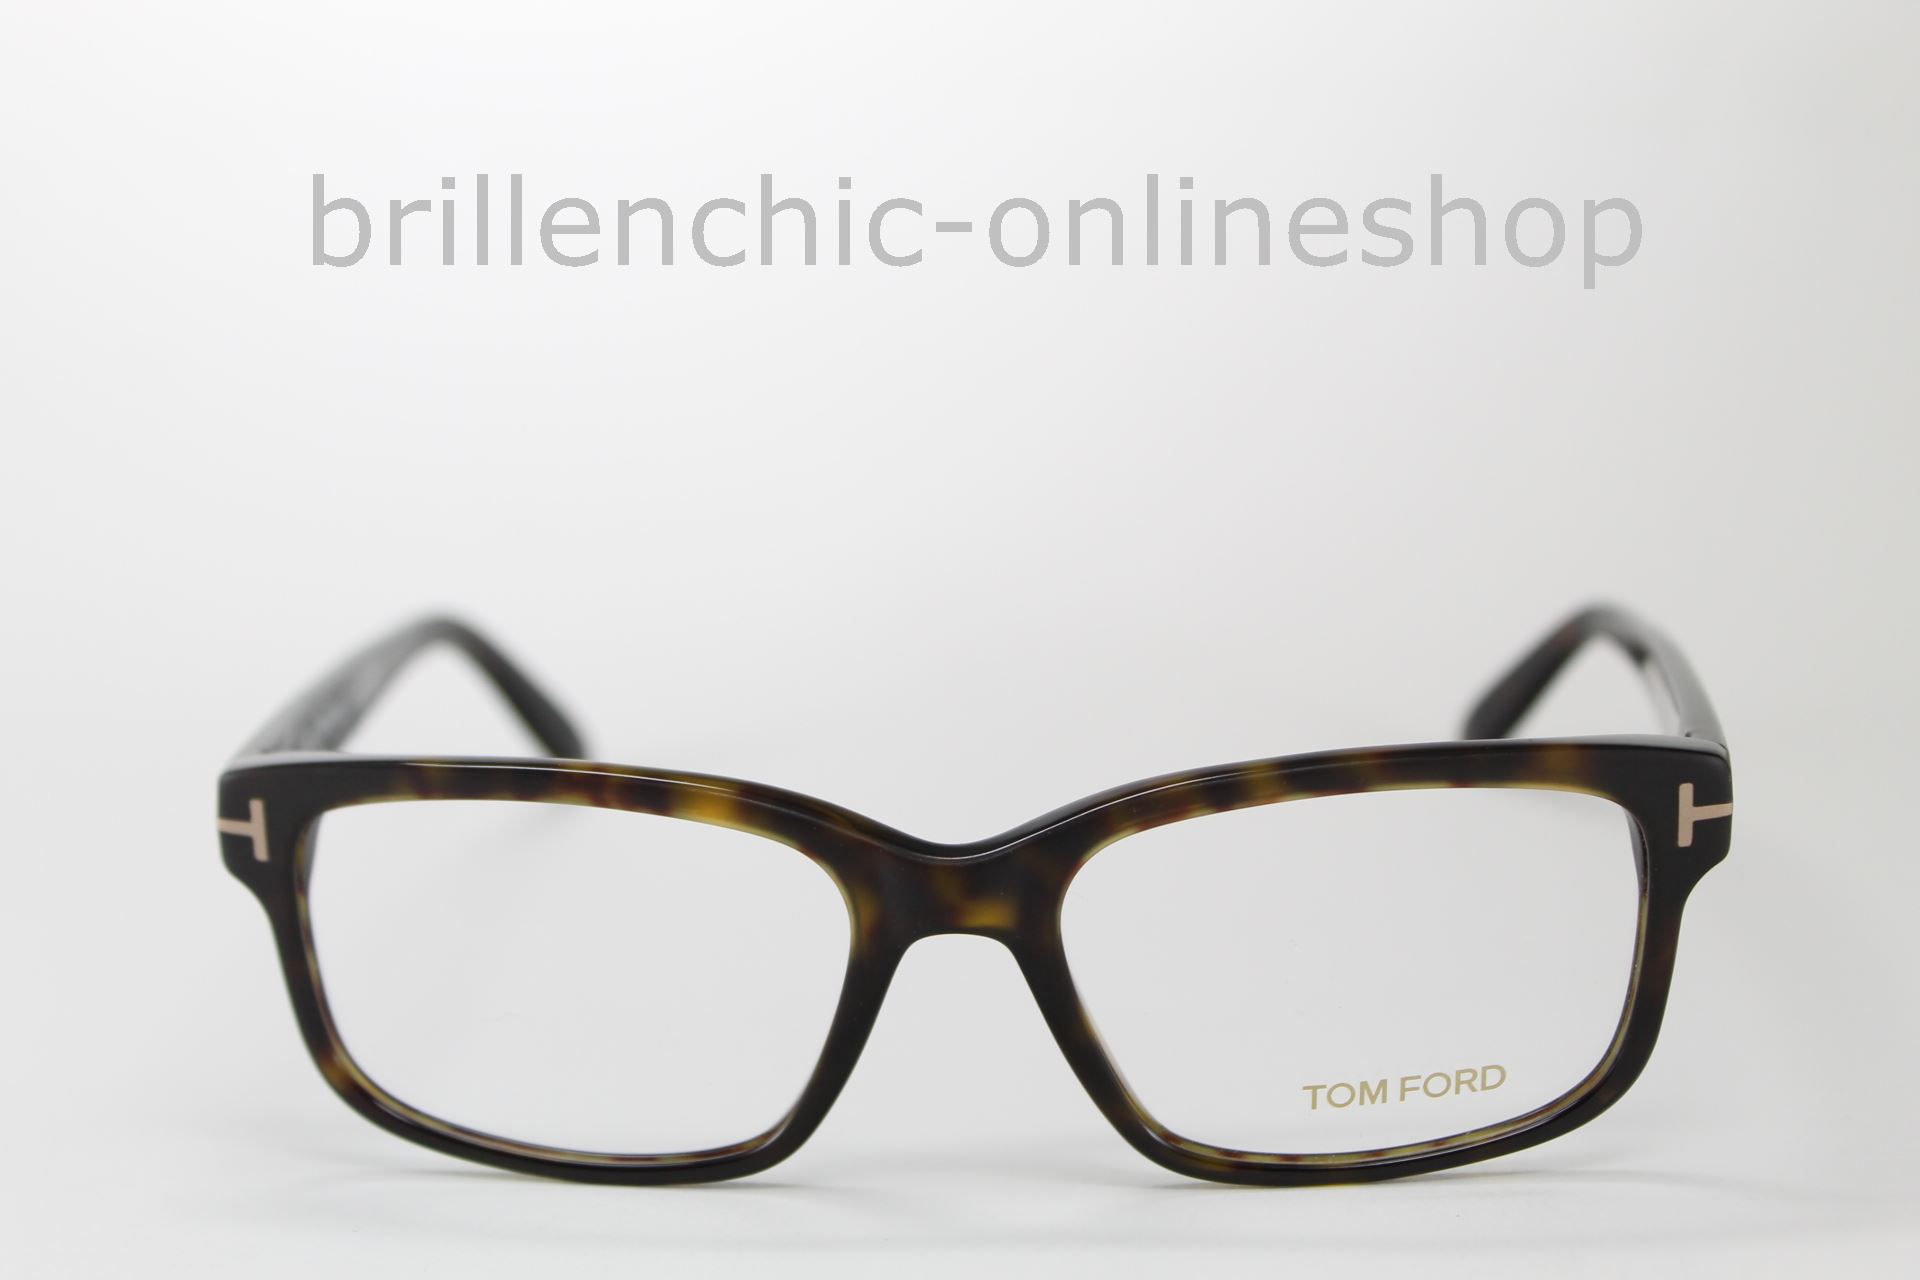 Brillenchic-onlineshop in Berlin - TOM FORD TF 5313 052 